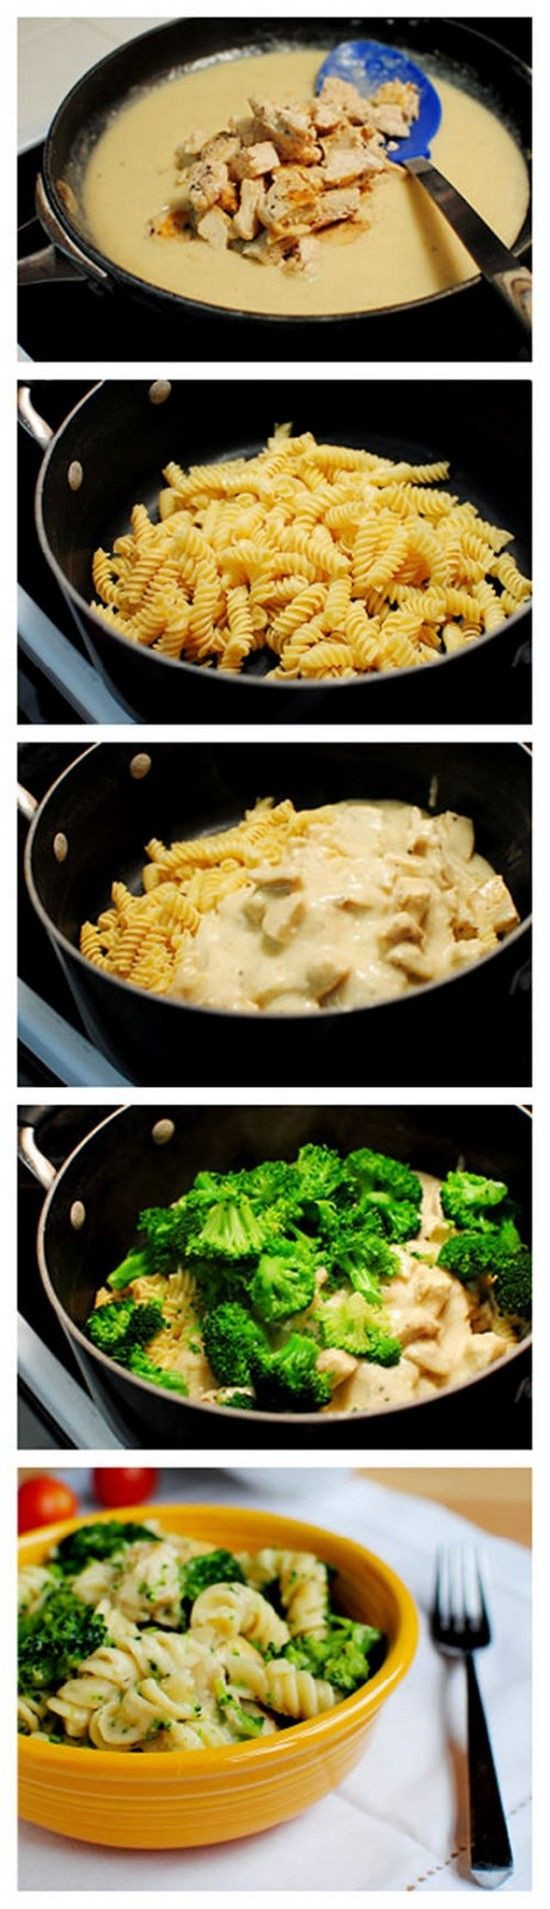 Healthy Filling Dinners
 17 Best ideas about Healthy Filling Meals on Pinterest